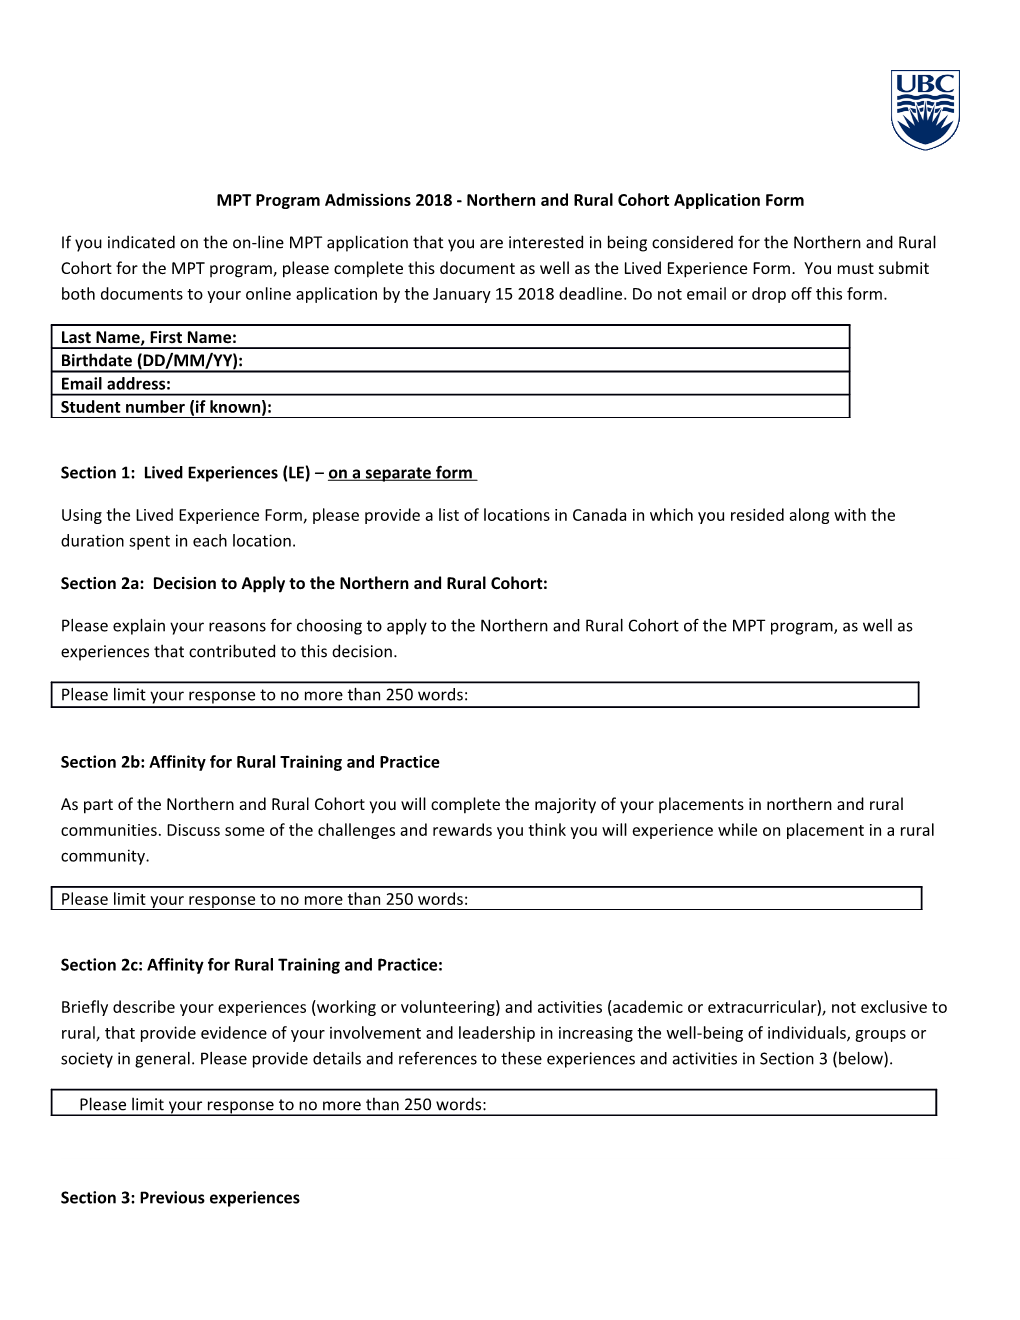 MPT Program Admissions 2018 - Northern and Rural Cohort Application Form